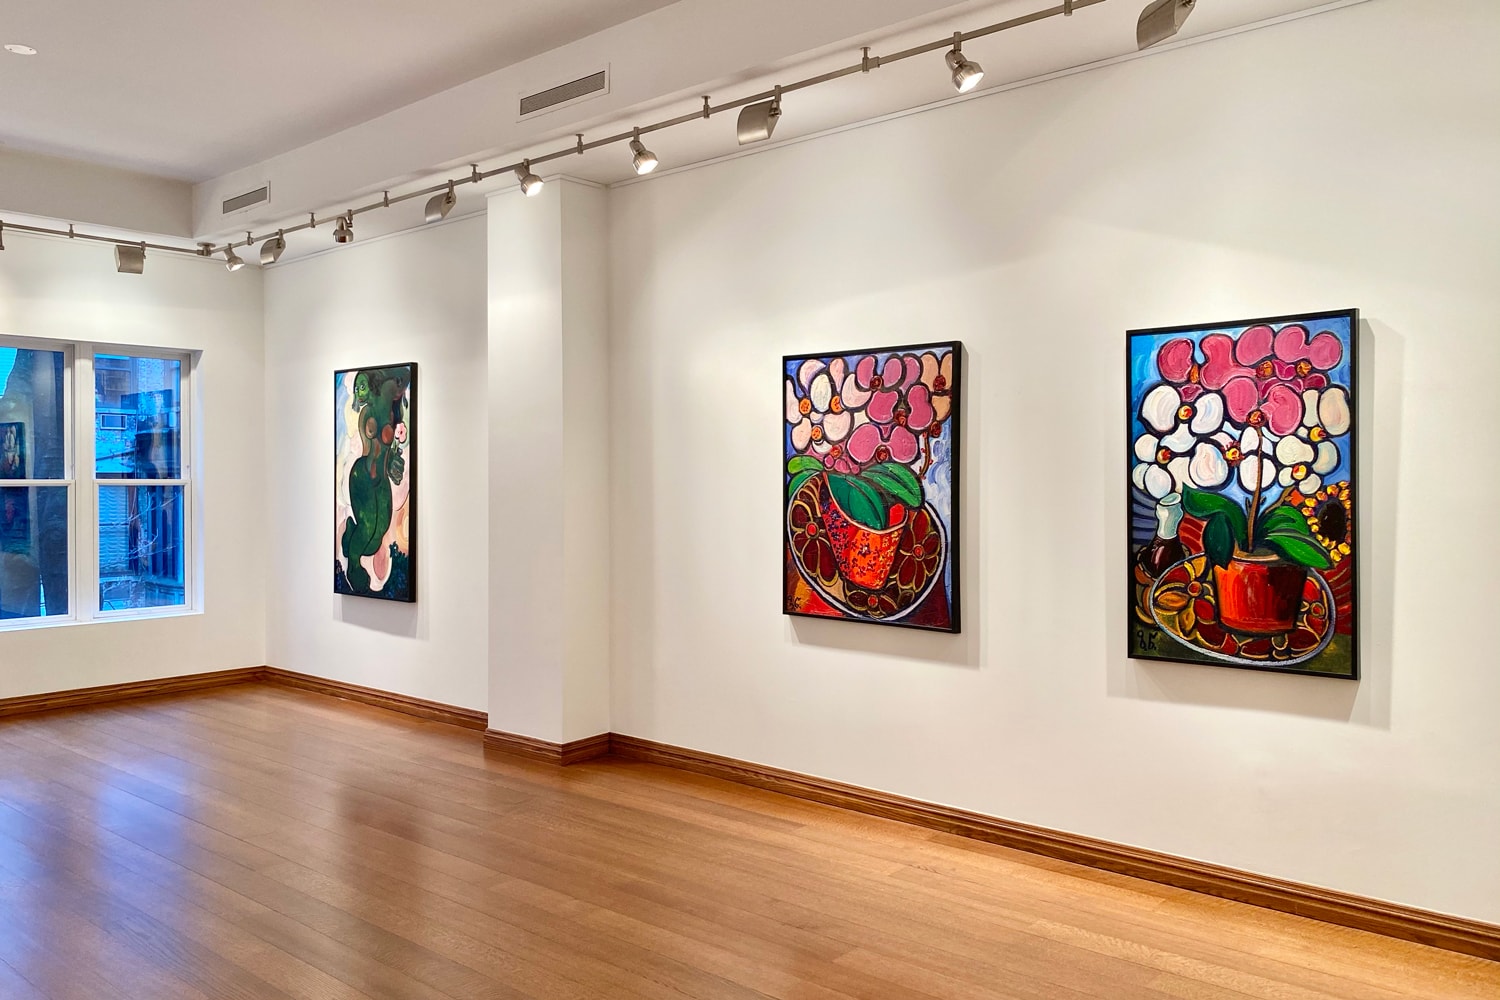 zurab tsereteli surrounded by flowers padre gallery exhibition